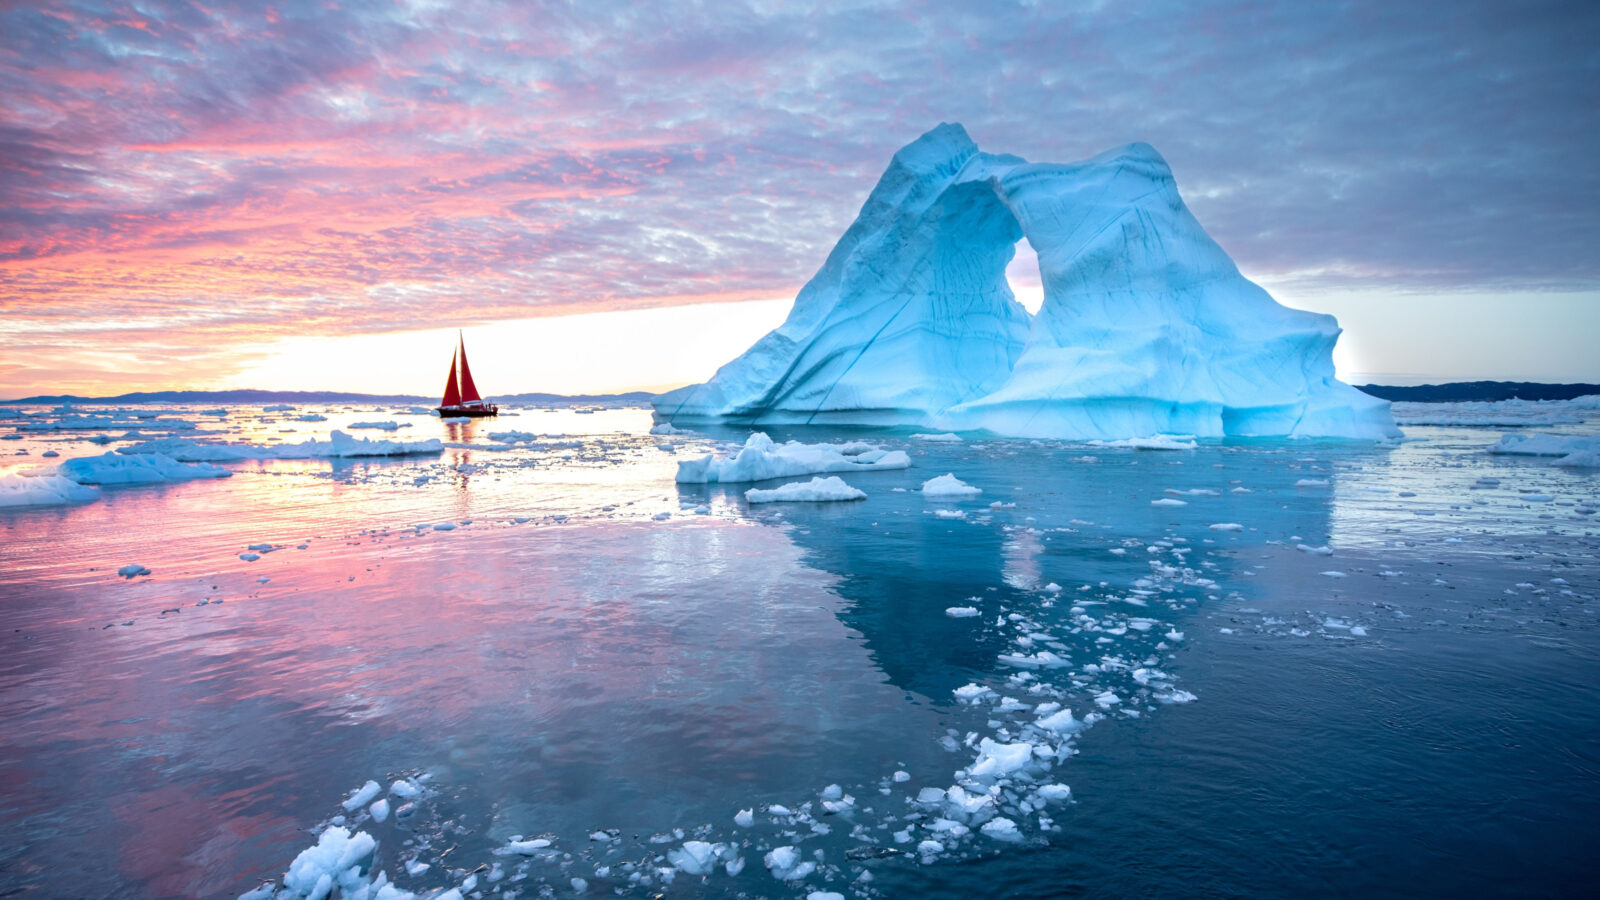 photo of greenland with an iceberg and a little red sailboat